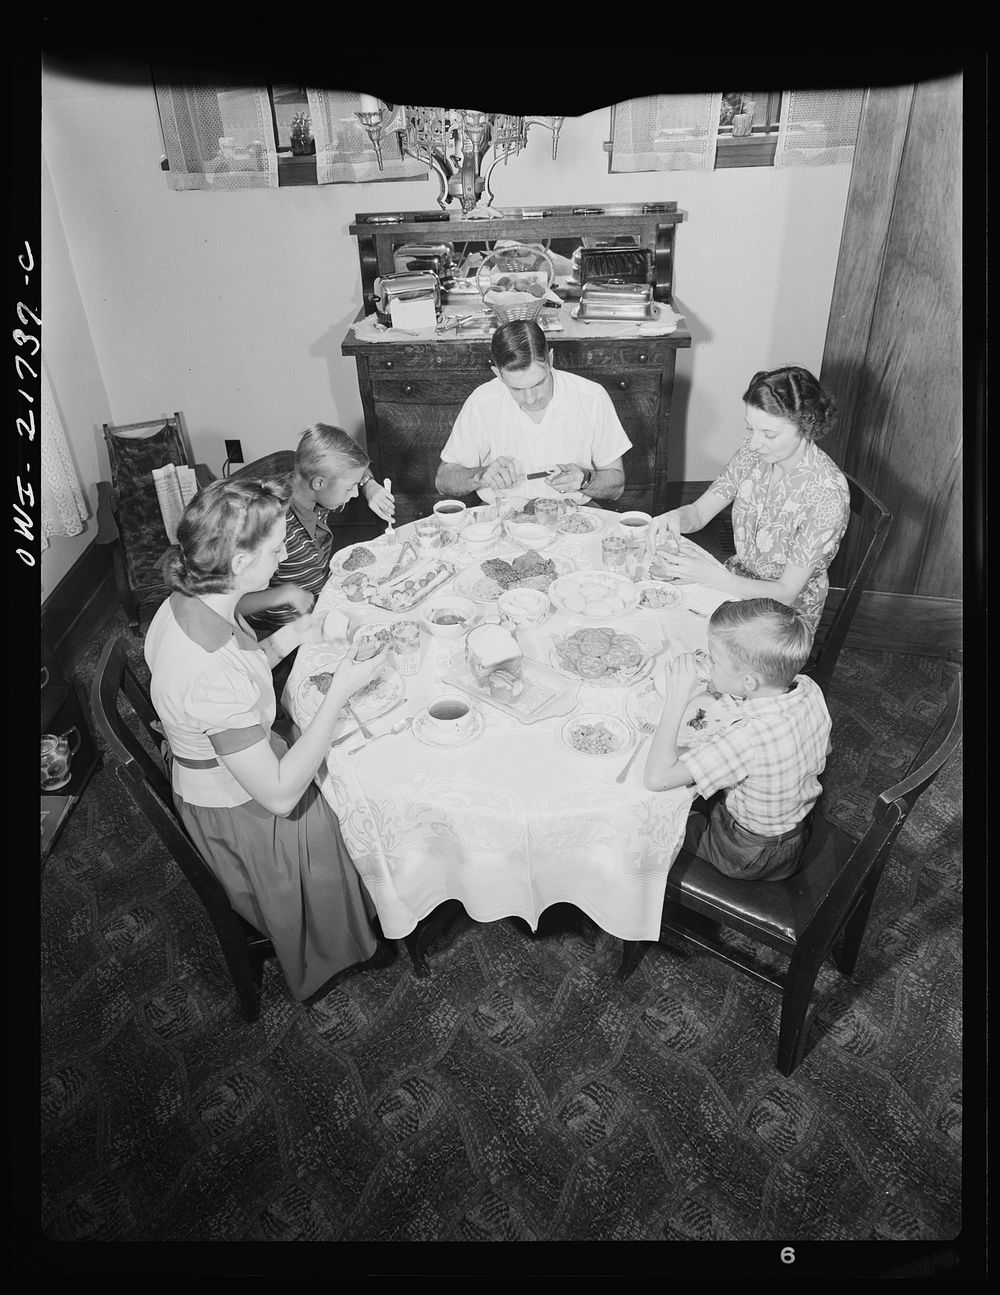 Rochester, New York. The Babcocks at the dinner table. Sourced from the Library of Congress.